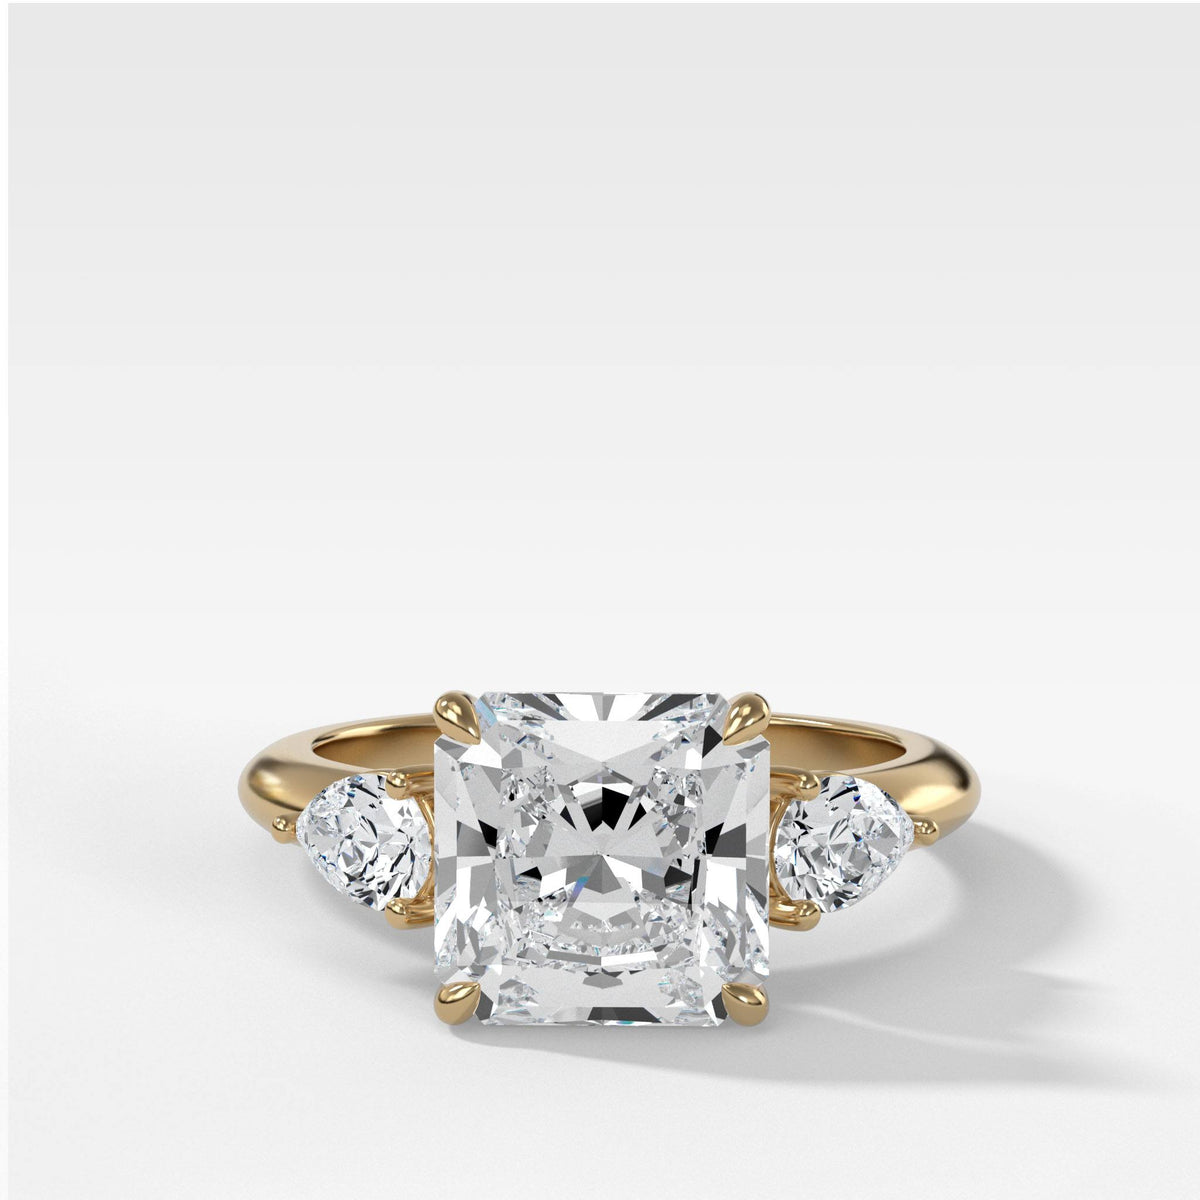 Engagement Rings | Classic & Timeless Iconic Design • Above Diamond